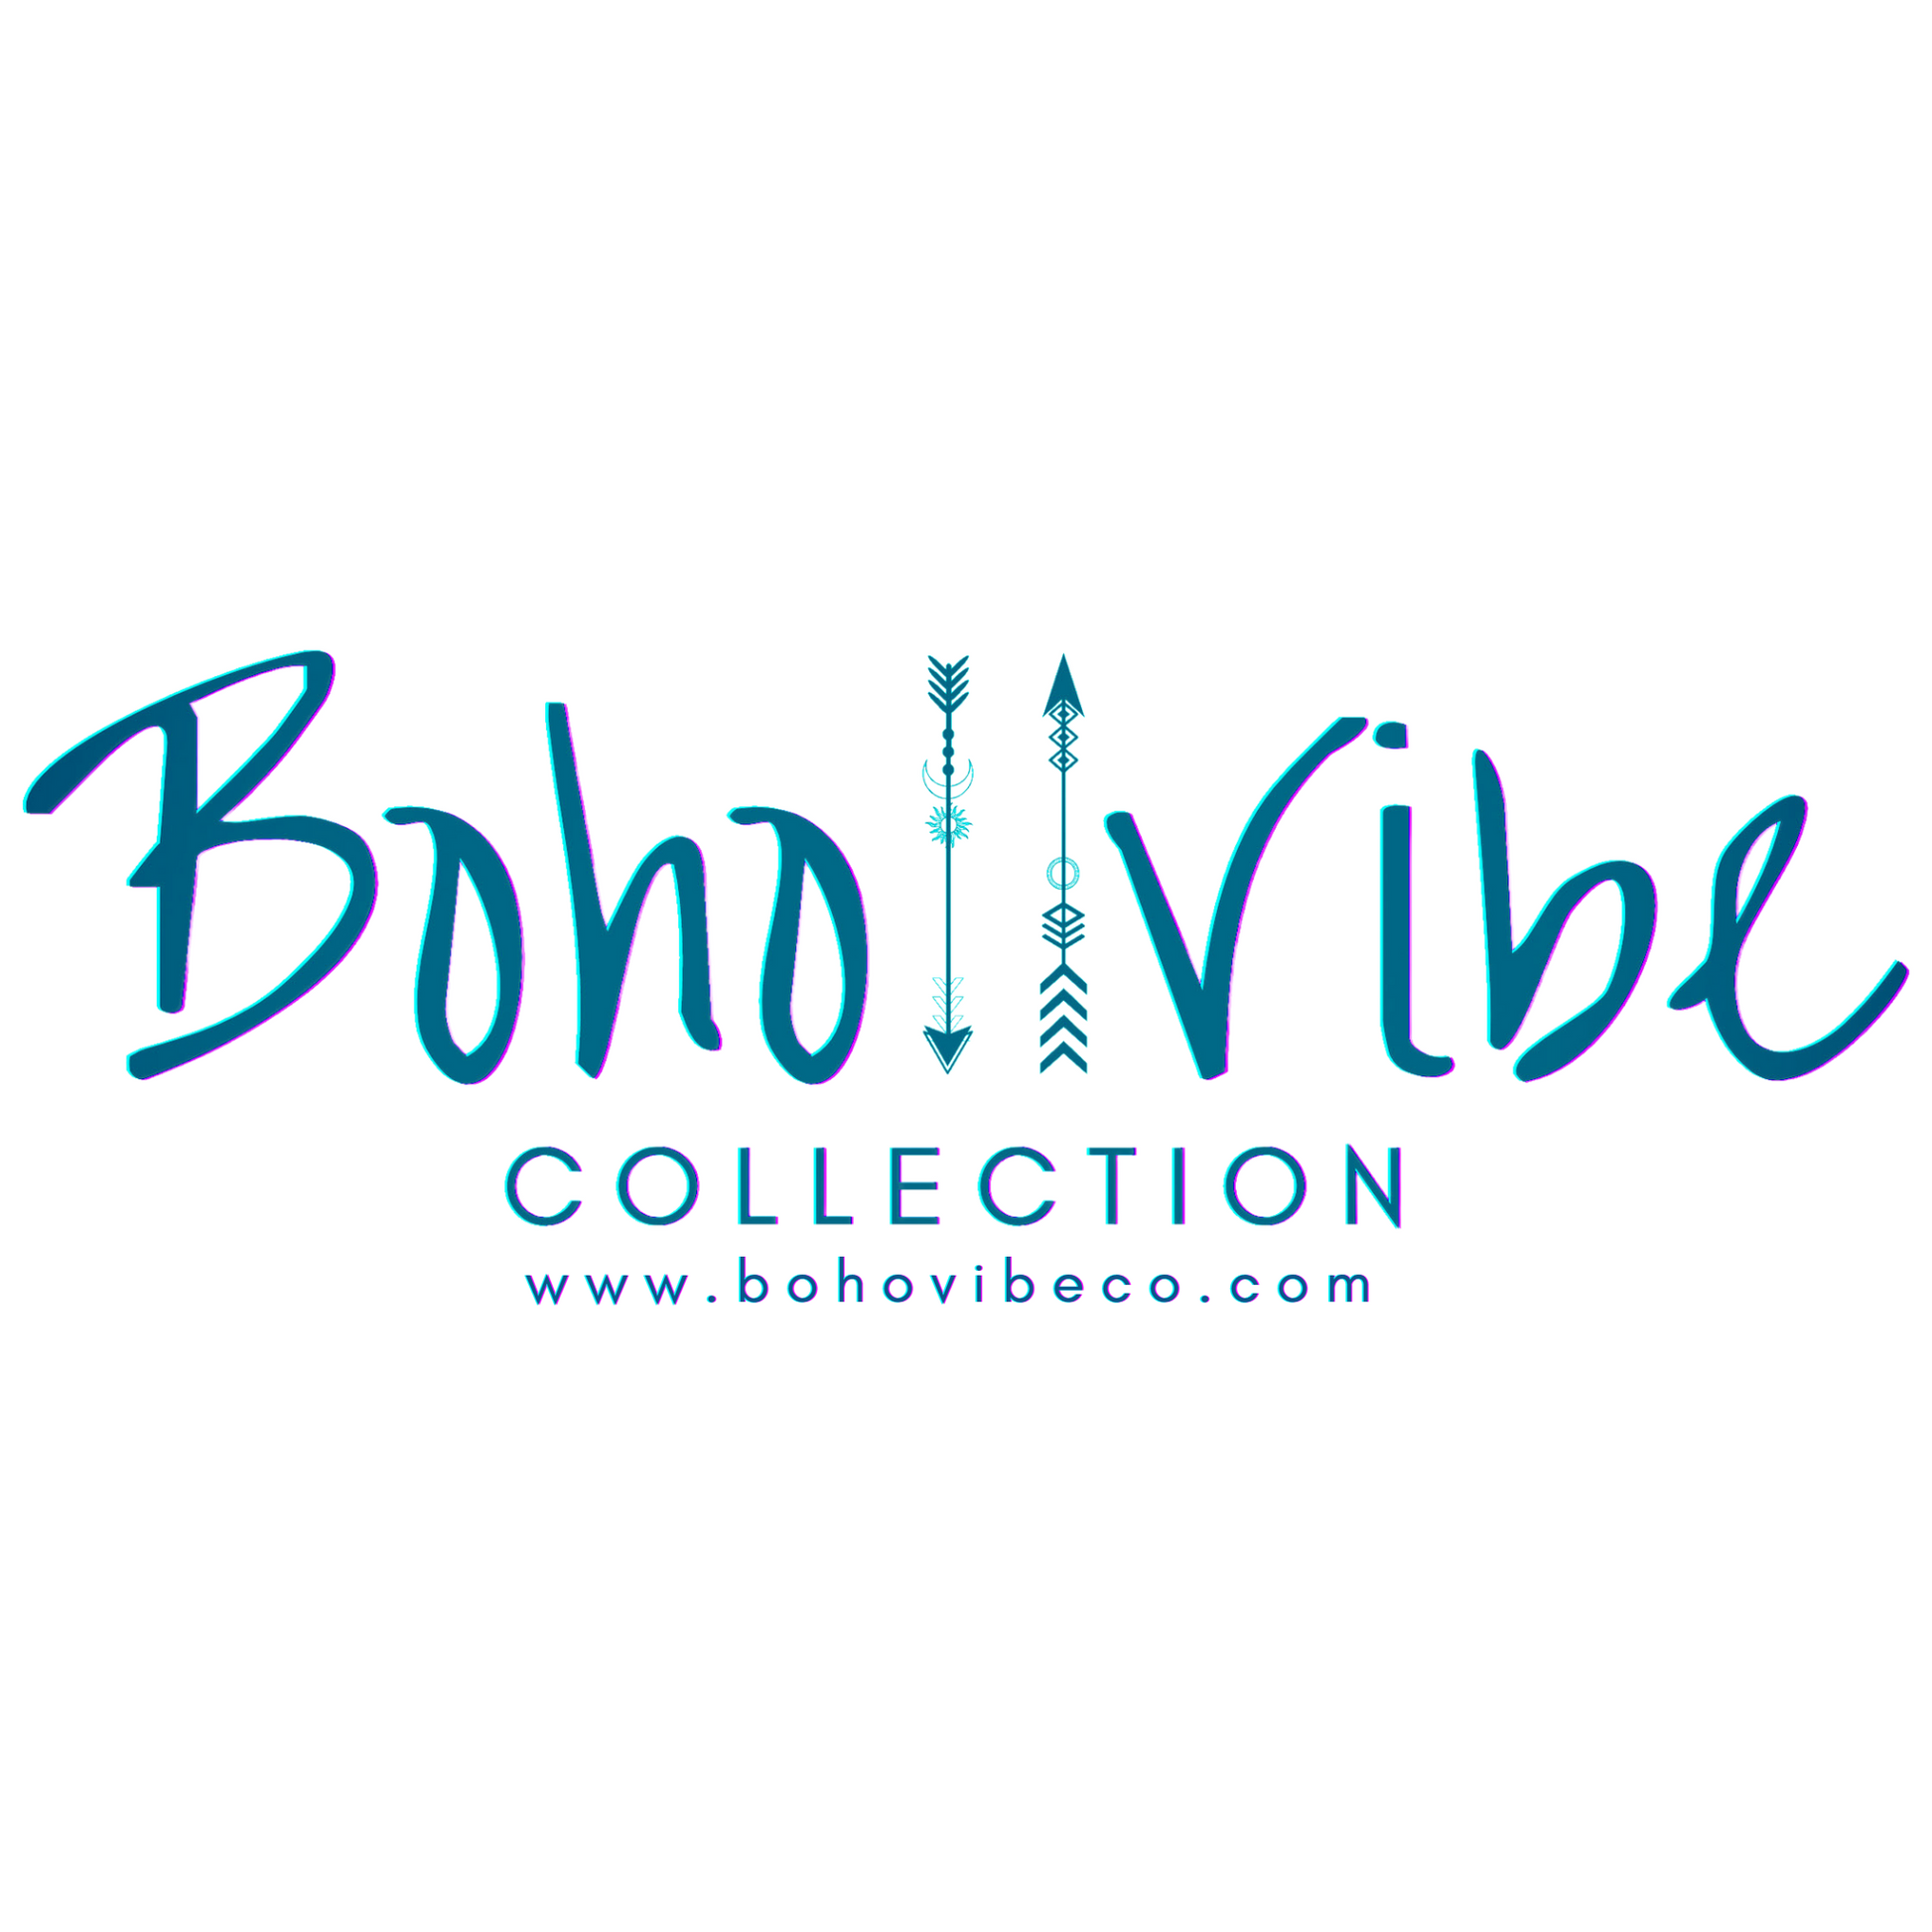 Boho ↡↟ Vibe Collection ↠ Elegant Simplicity - The Art of Living Well 